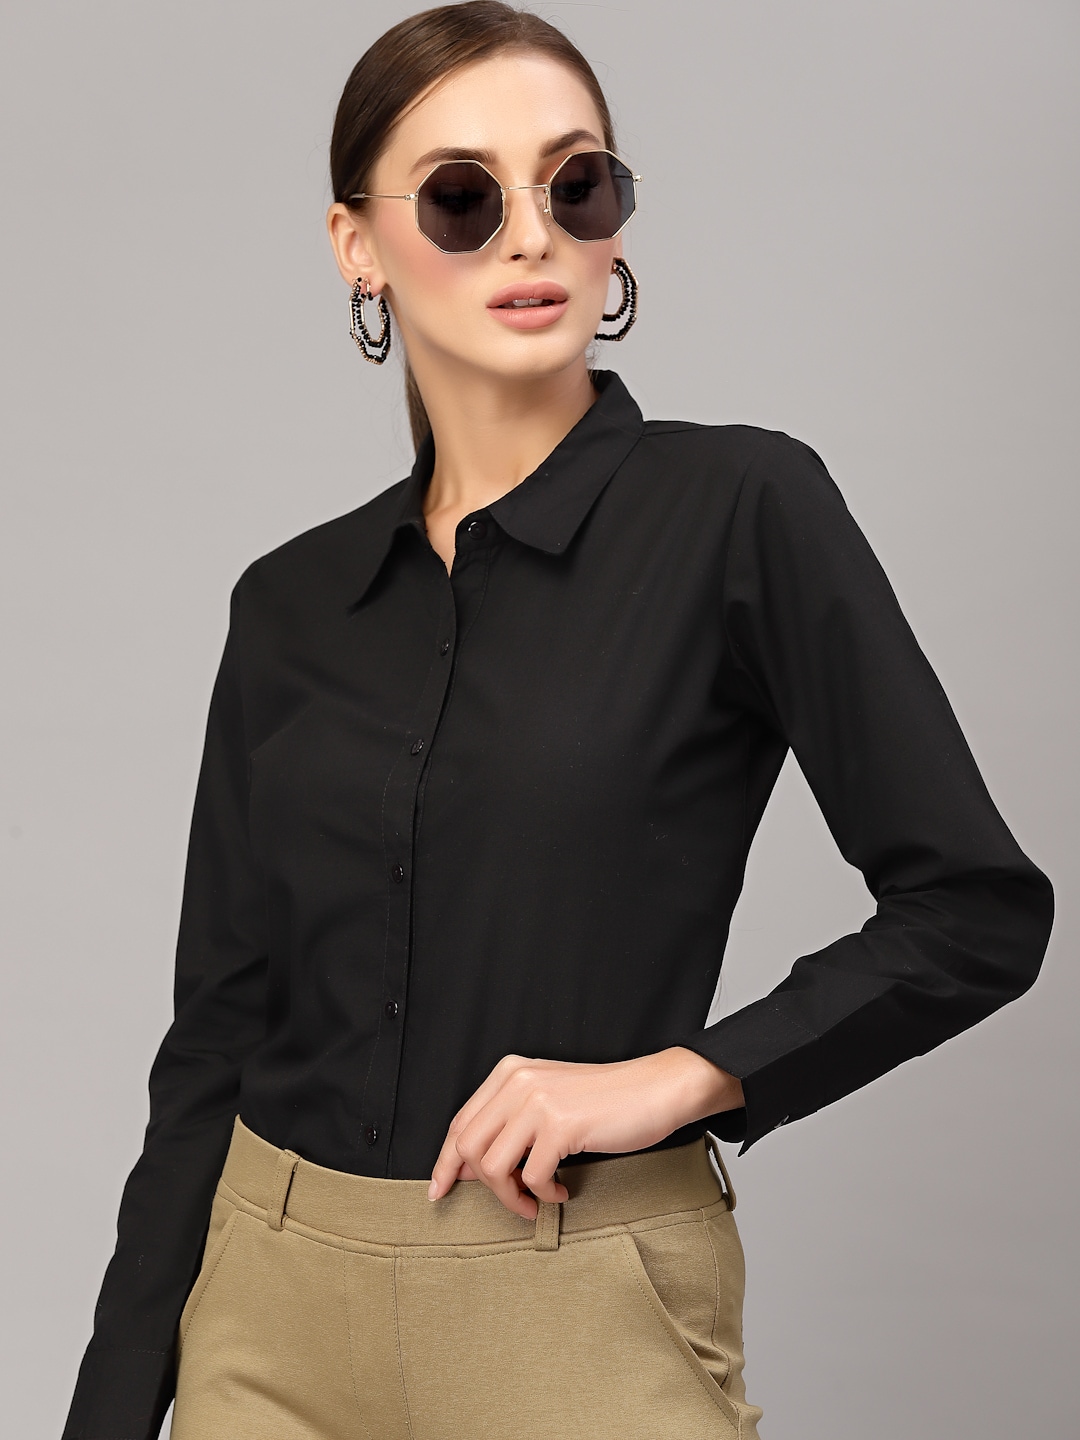 Style Quotient Women Formal Shirt Price in India